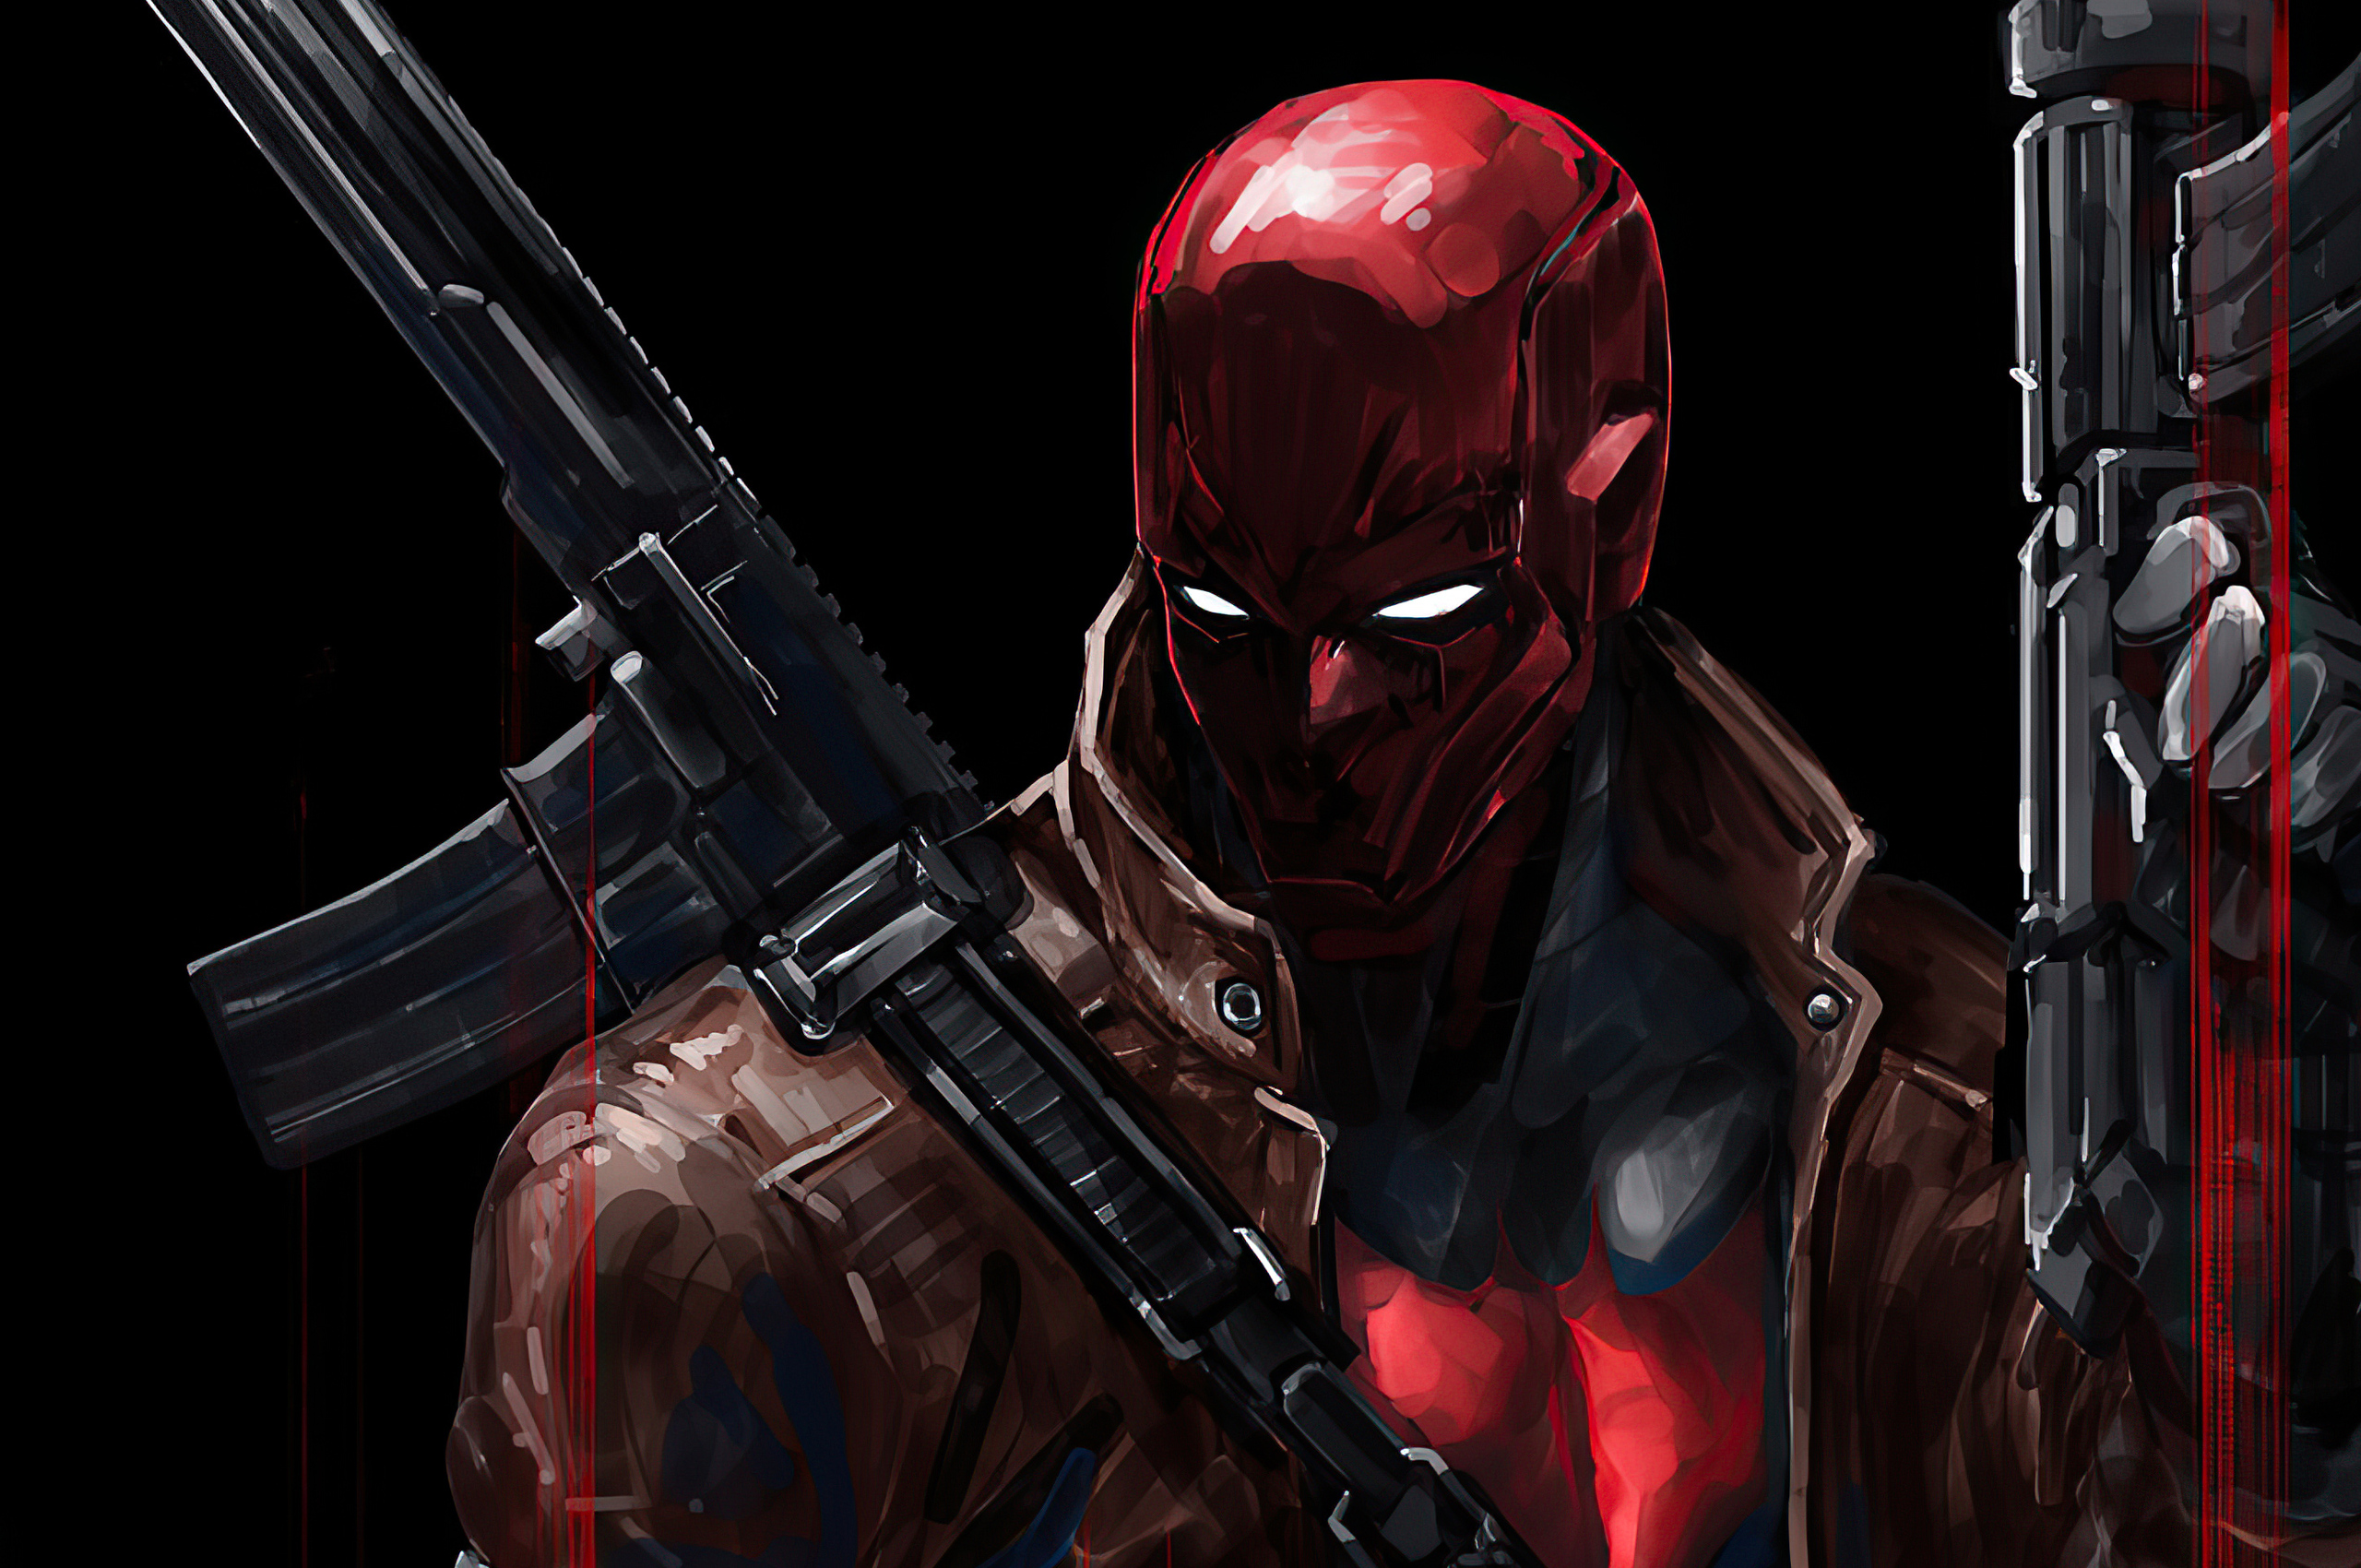 Red Hood With Gun In 2560x1700 Resolution. red-hood-with-gun-hj.jpg. 